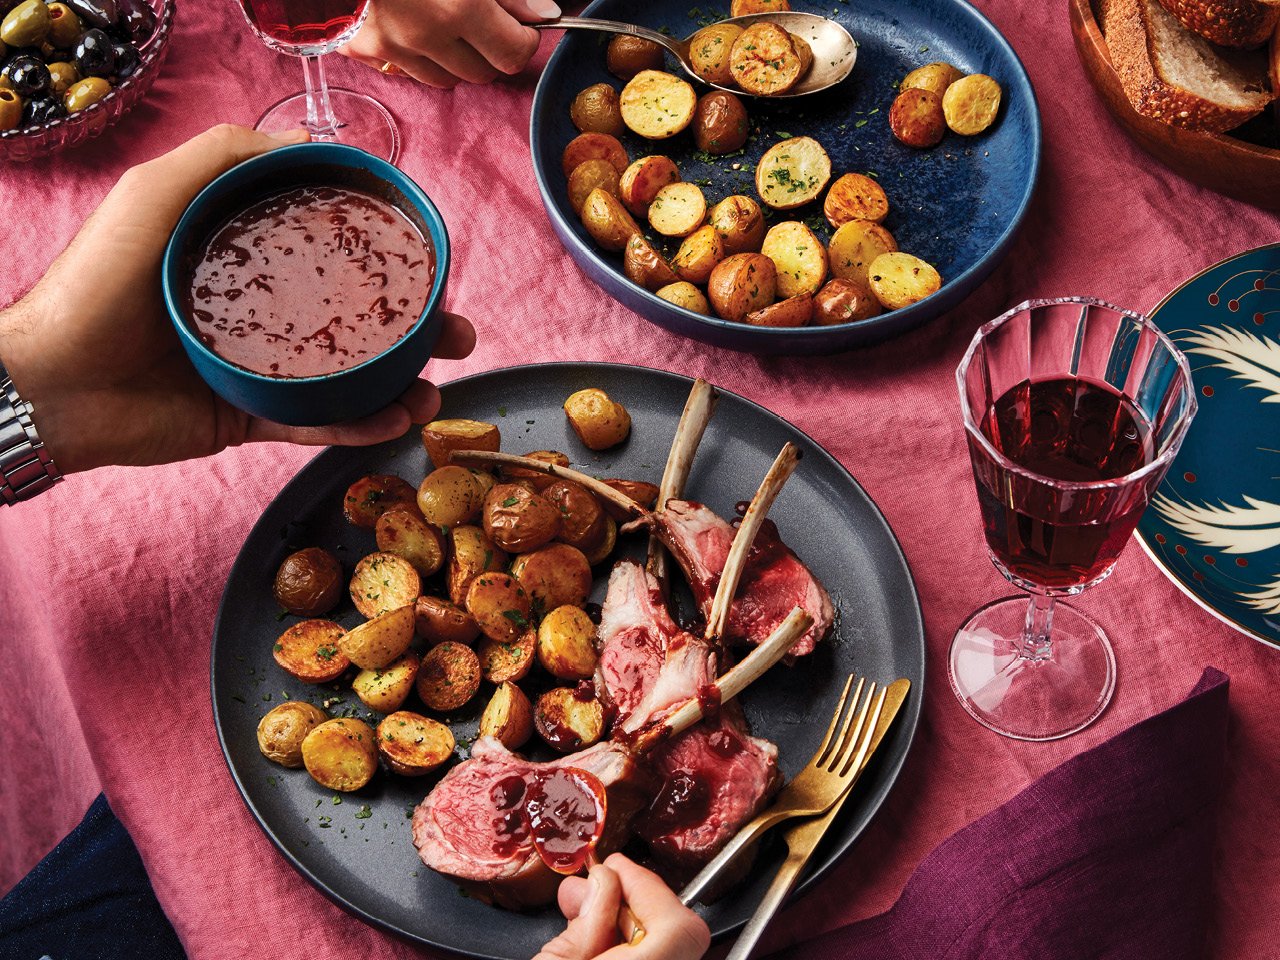 Glazed Rack of Lamb with Shallot Gravy and Baby Potatoes